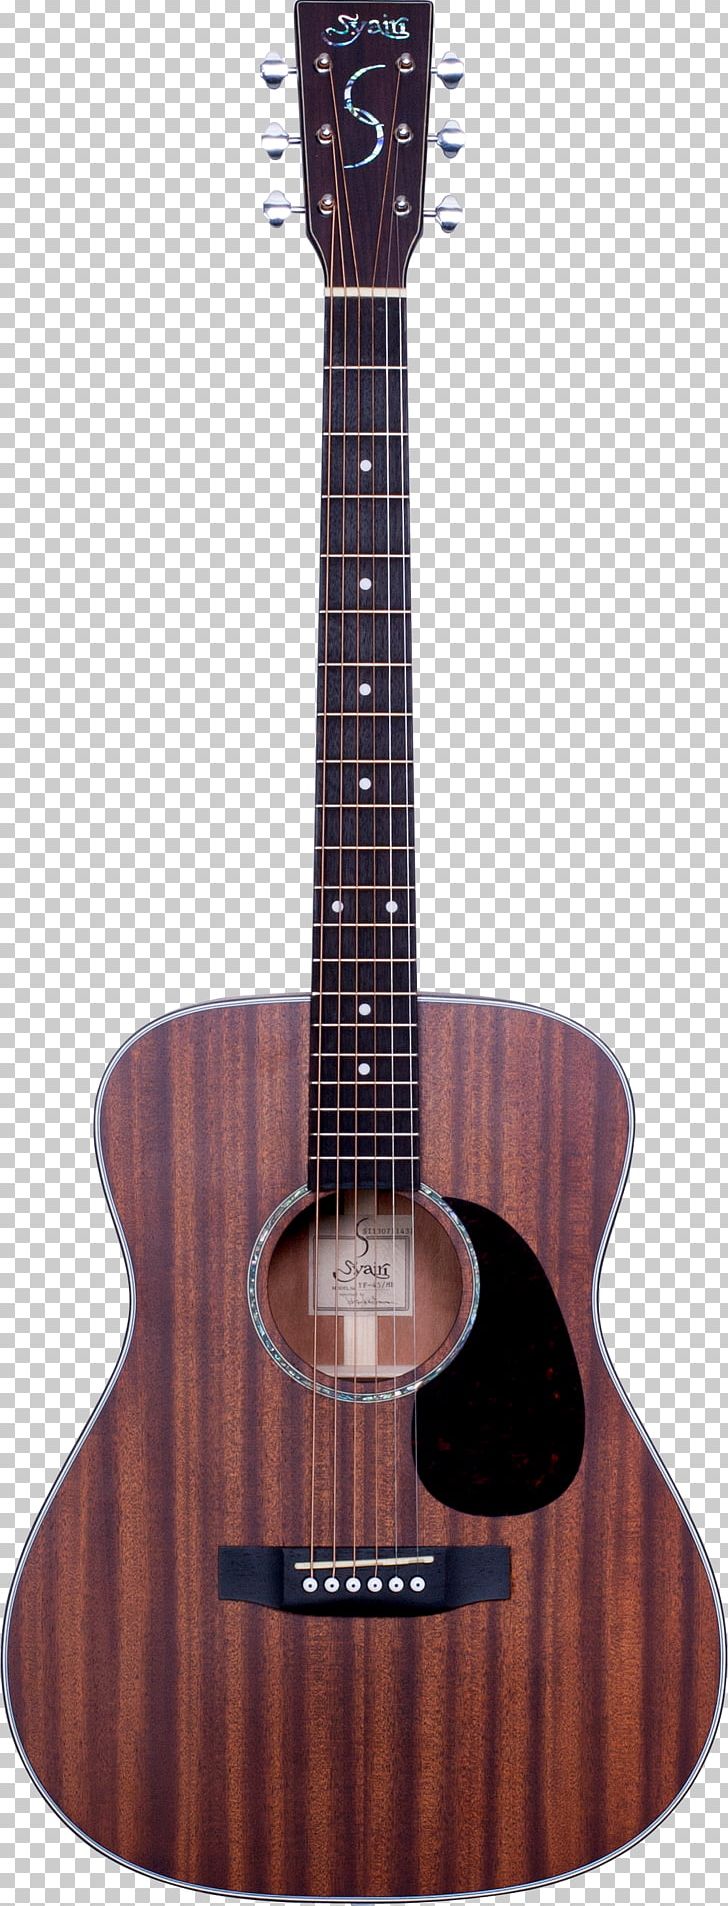 Acoustic Guitar Acoustic-electric Guitar Tiple String Instruments PNG, Clipart, Acoustic, Acoustic Electric Guitar, Classical Guitar, Cuatro, Guitar Accessory Free PNG Download